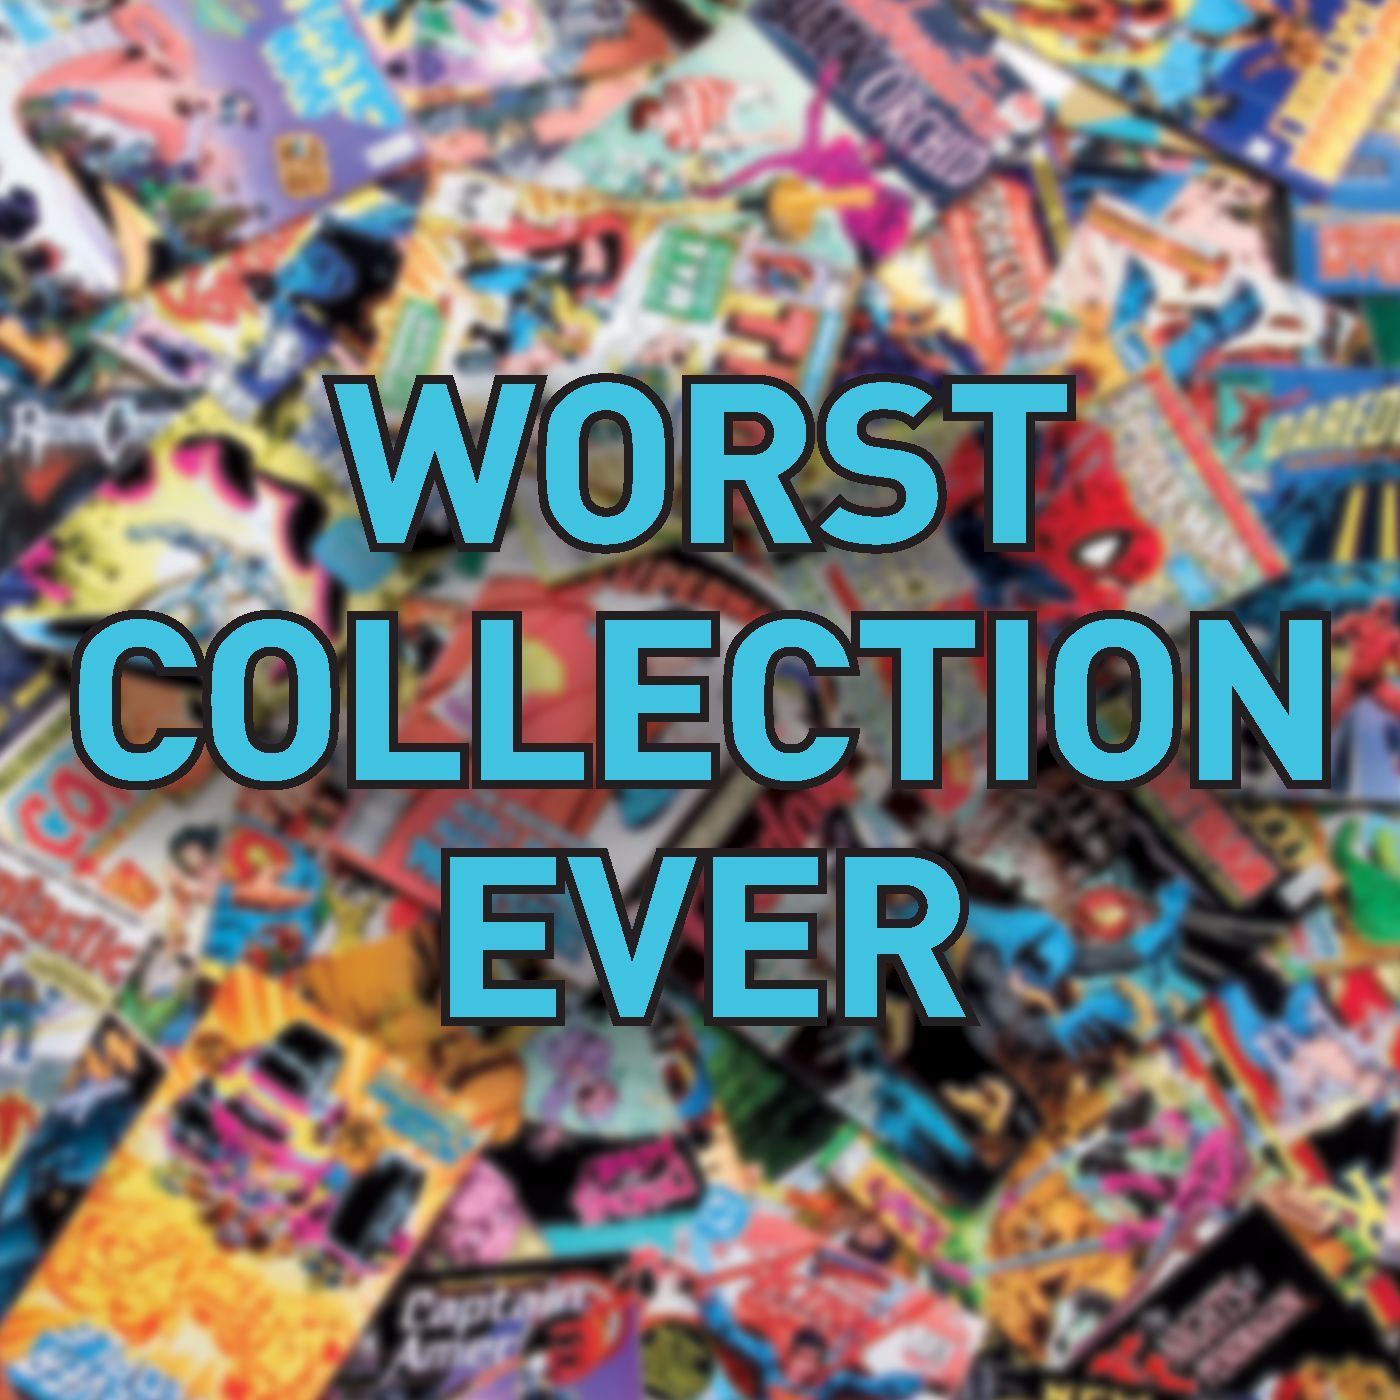 Worst Collection Ever